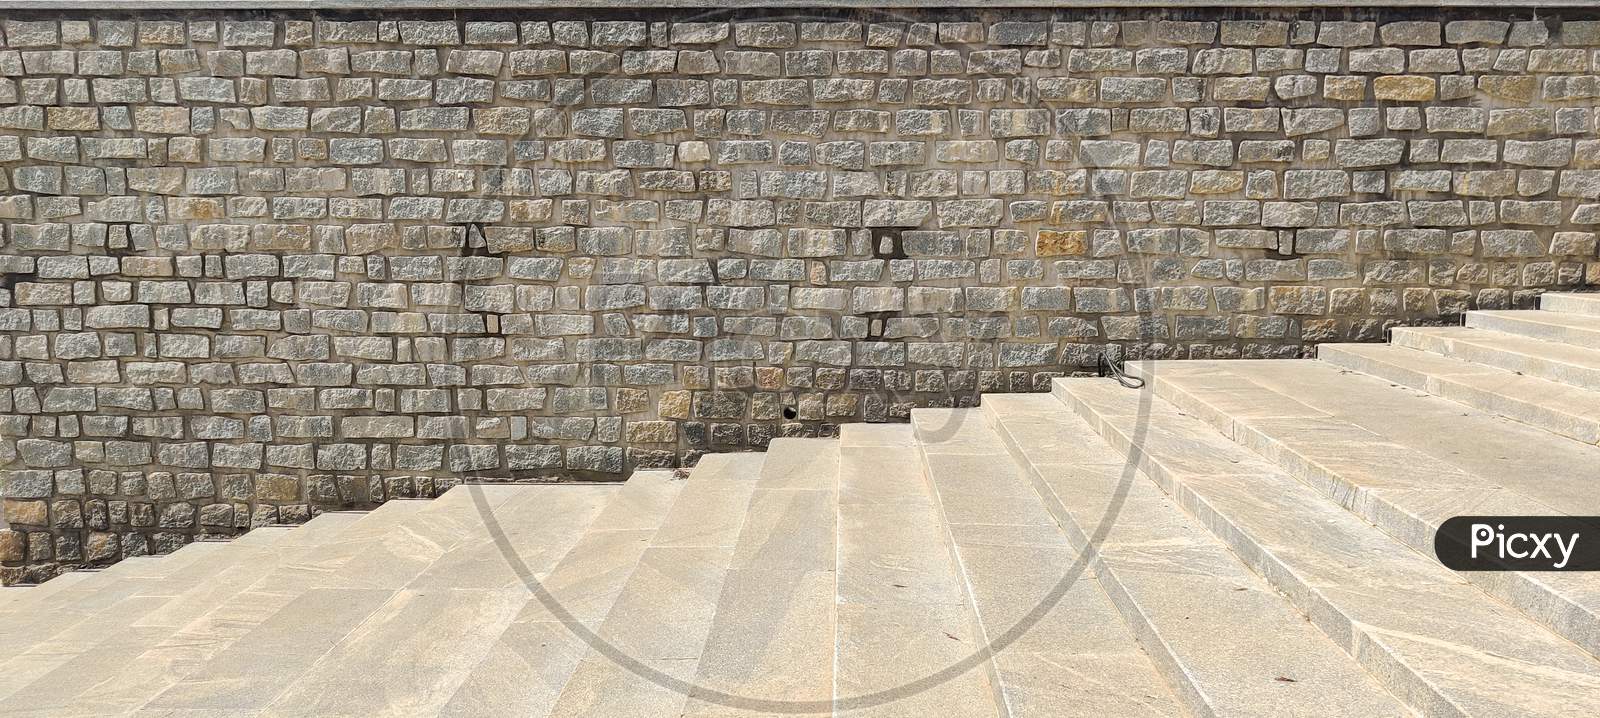 Abstract of stone wall and steps